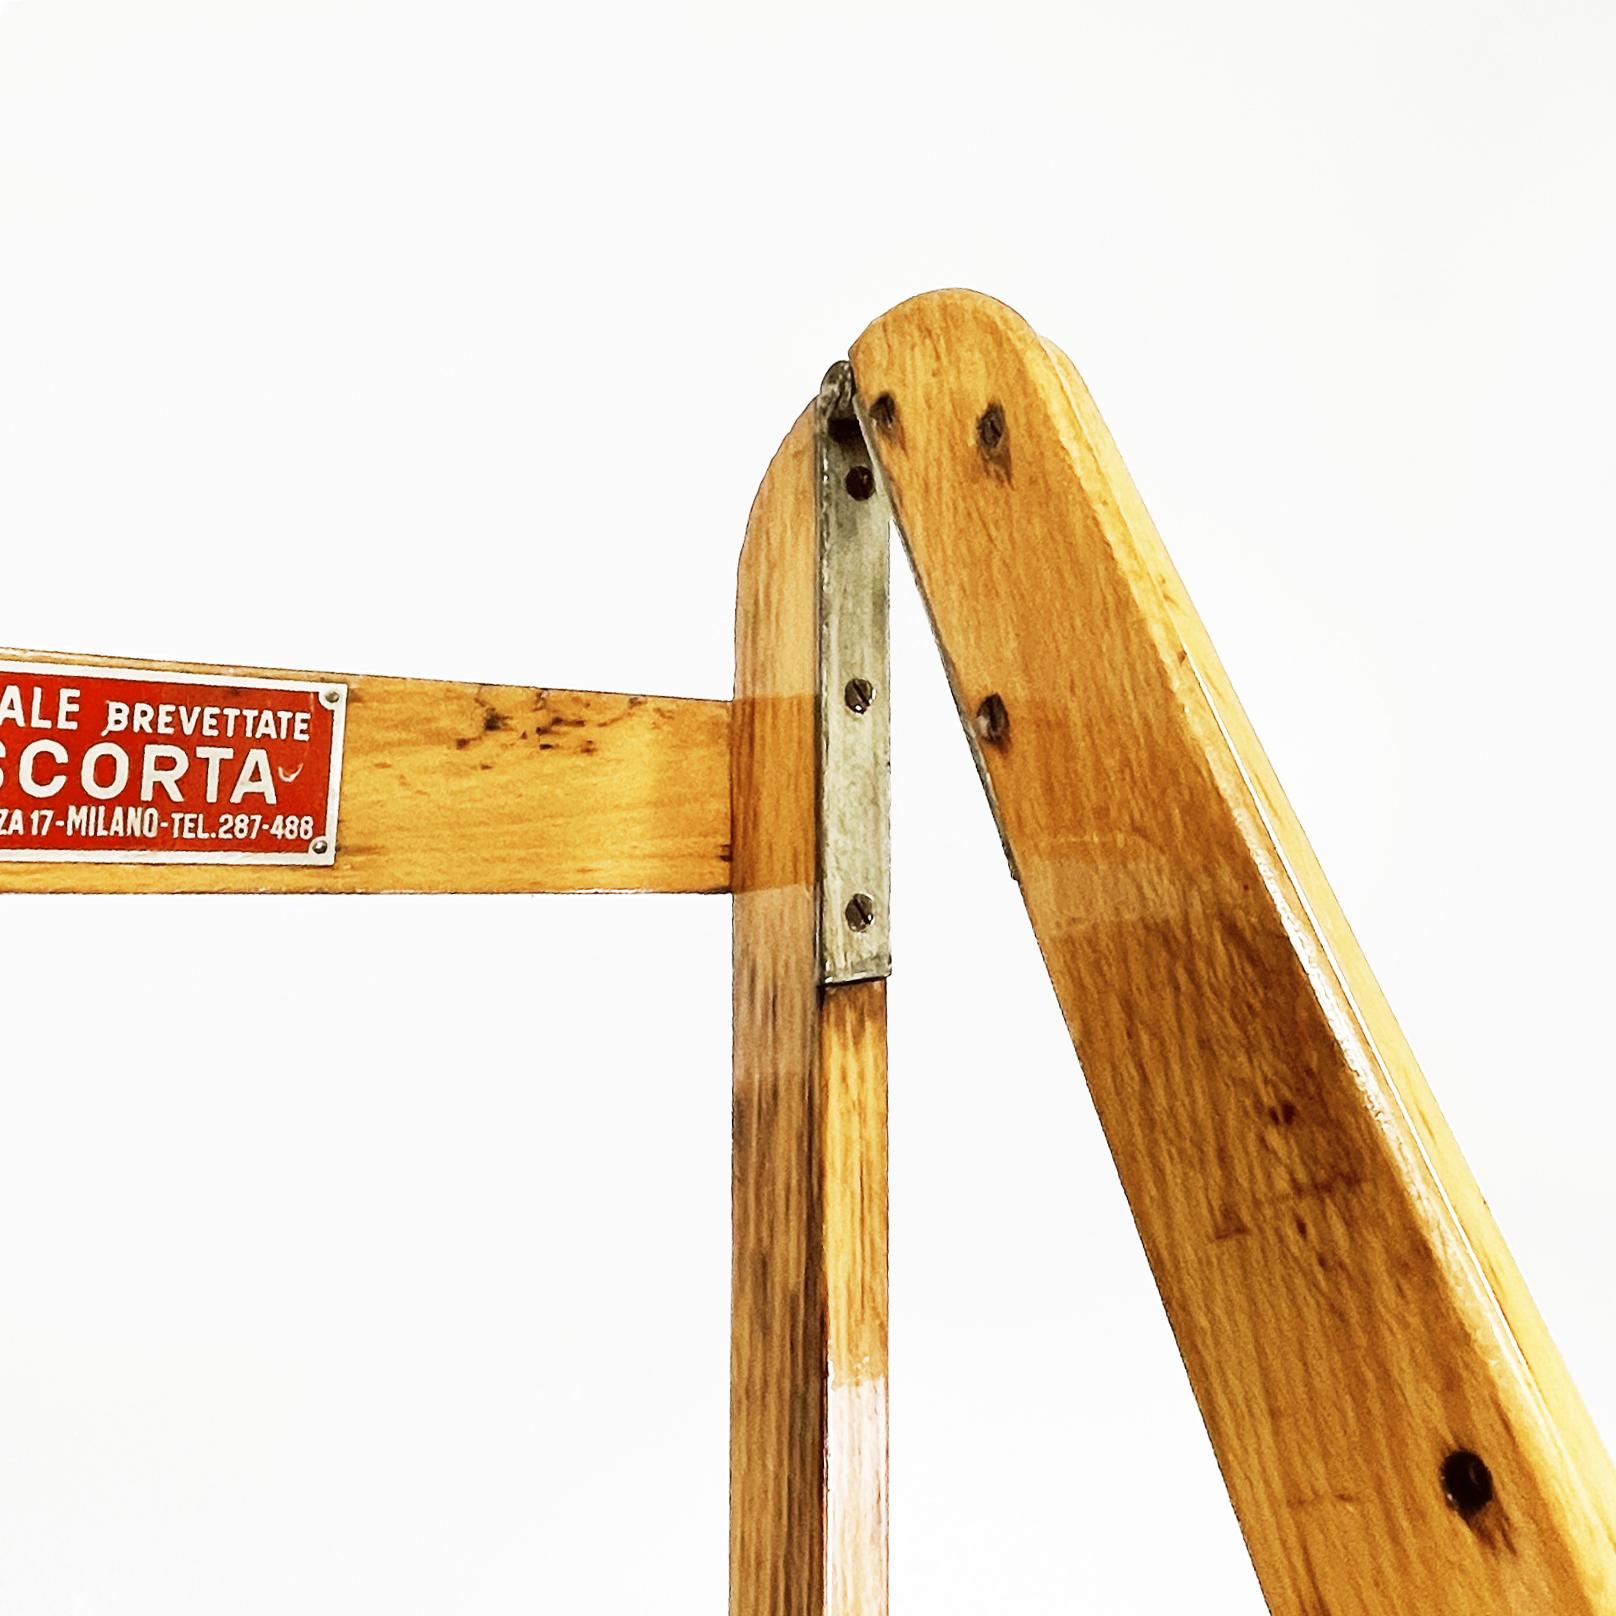 Italian Mid-Century Modern Polished Wooden Step Ladder Stair by Scorta, 1950s 3